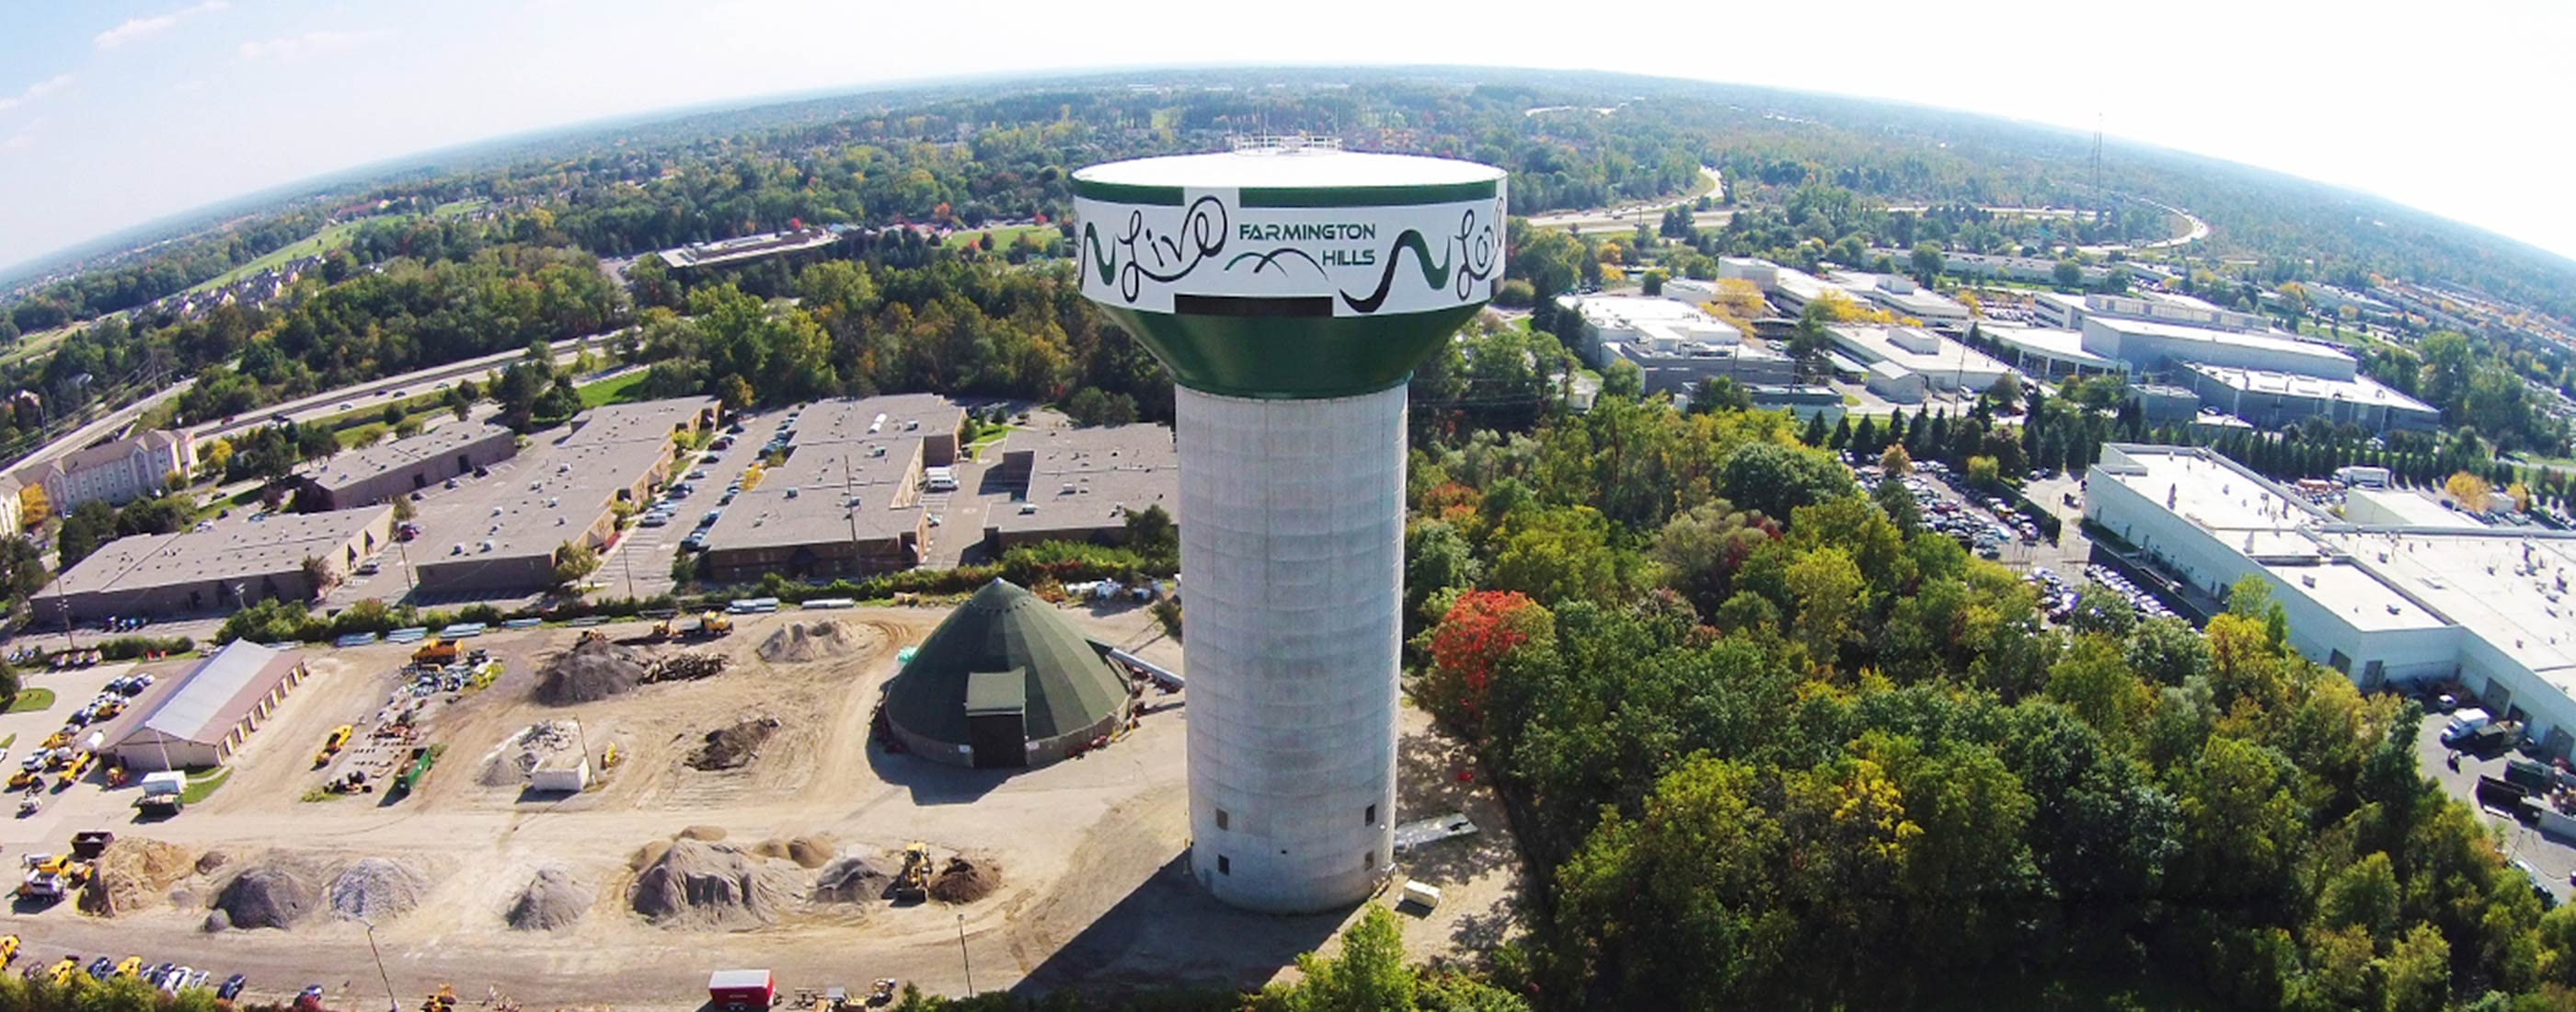 The elevated water tank in Farmington Hills, MI, designed by OHM Advisors, reduces peak water system demand and saves the city millions of dollars annually.